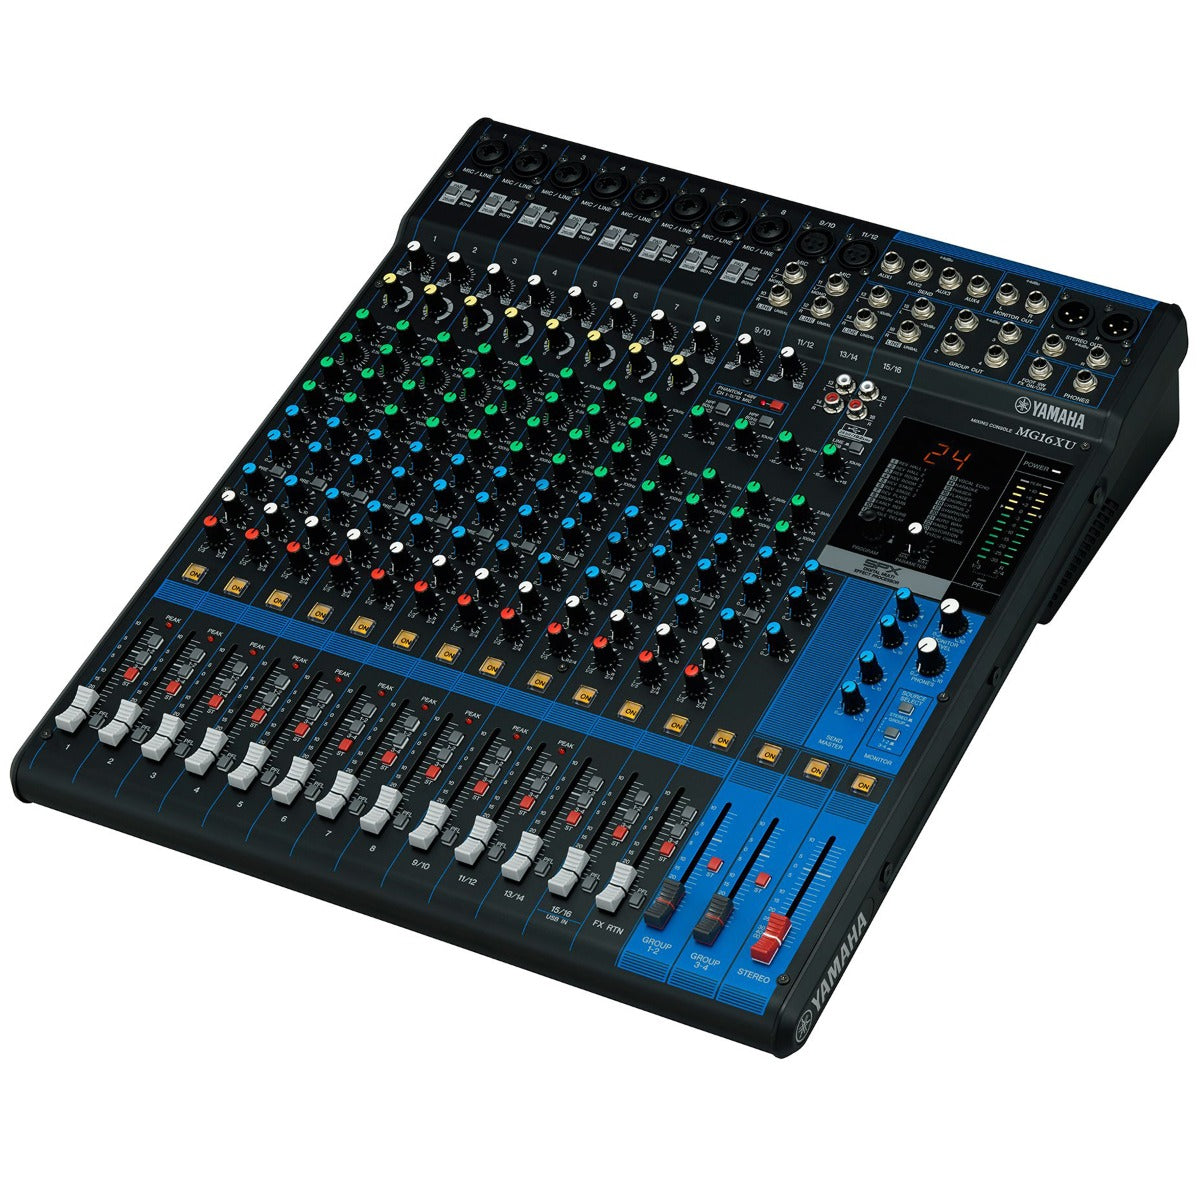 Yamaha MG16XU 16-Channel Stereo Mixer with USB Audio Interface - View 2